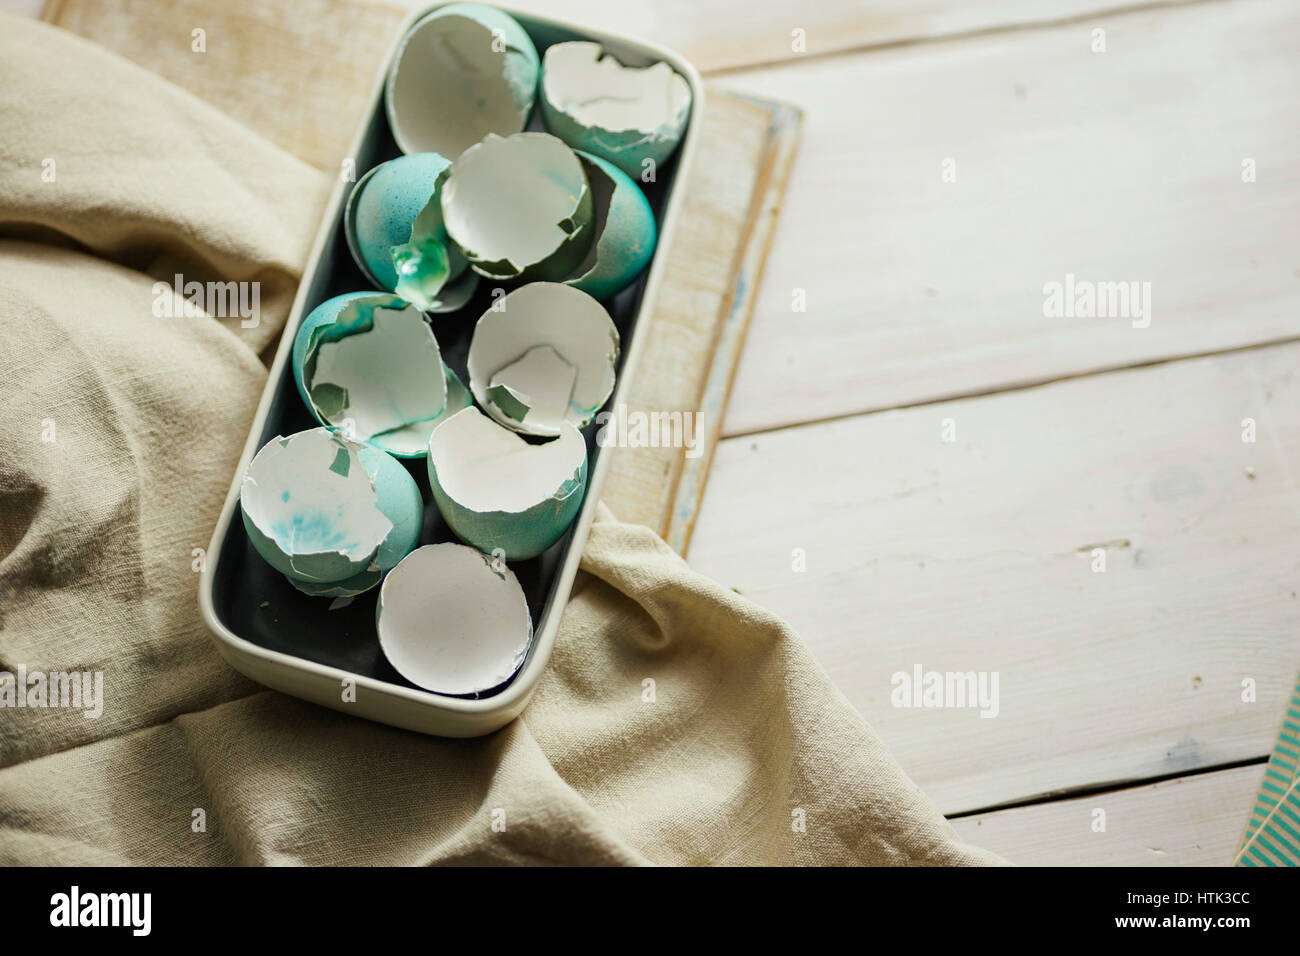 Plate full of blue tinted eggshells on white wooden table. Easter decoration. Stock Photo